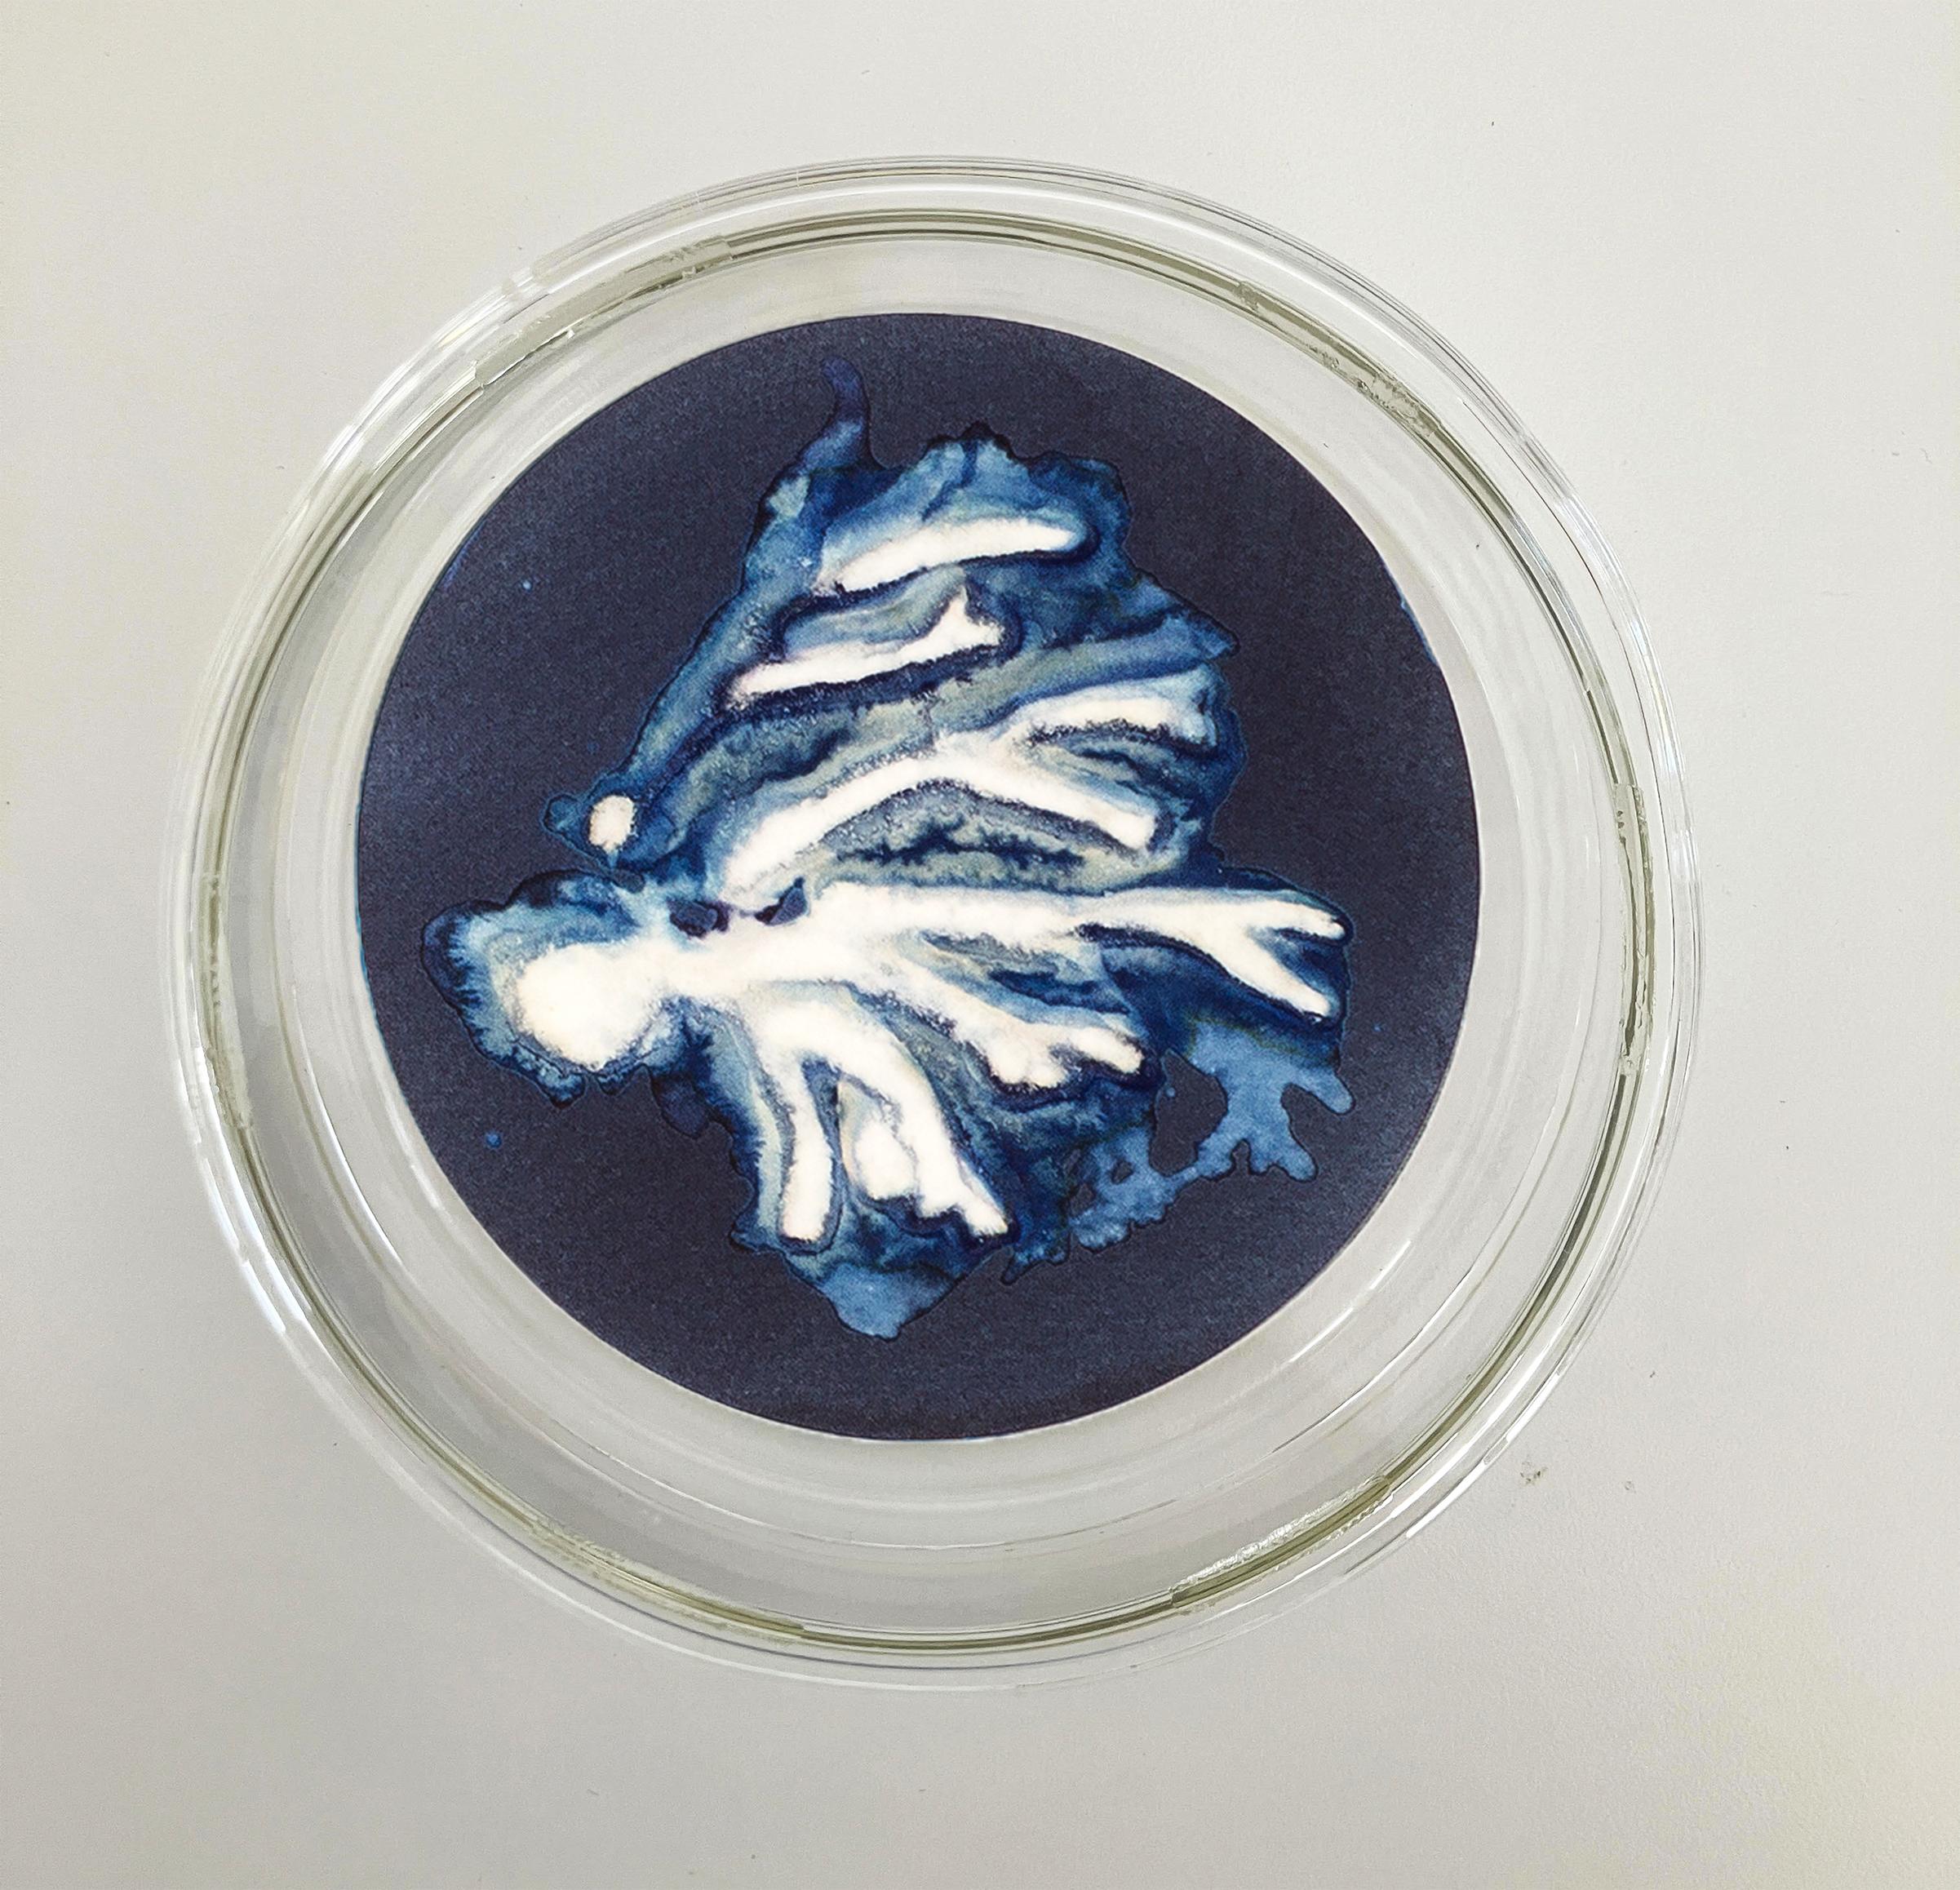 Algas 75, 83 Y 26. Cyanotype photograhs mounted in high resistance glass dish For Sale 3